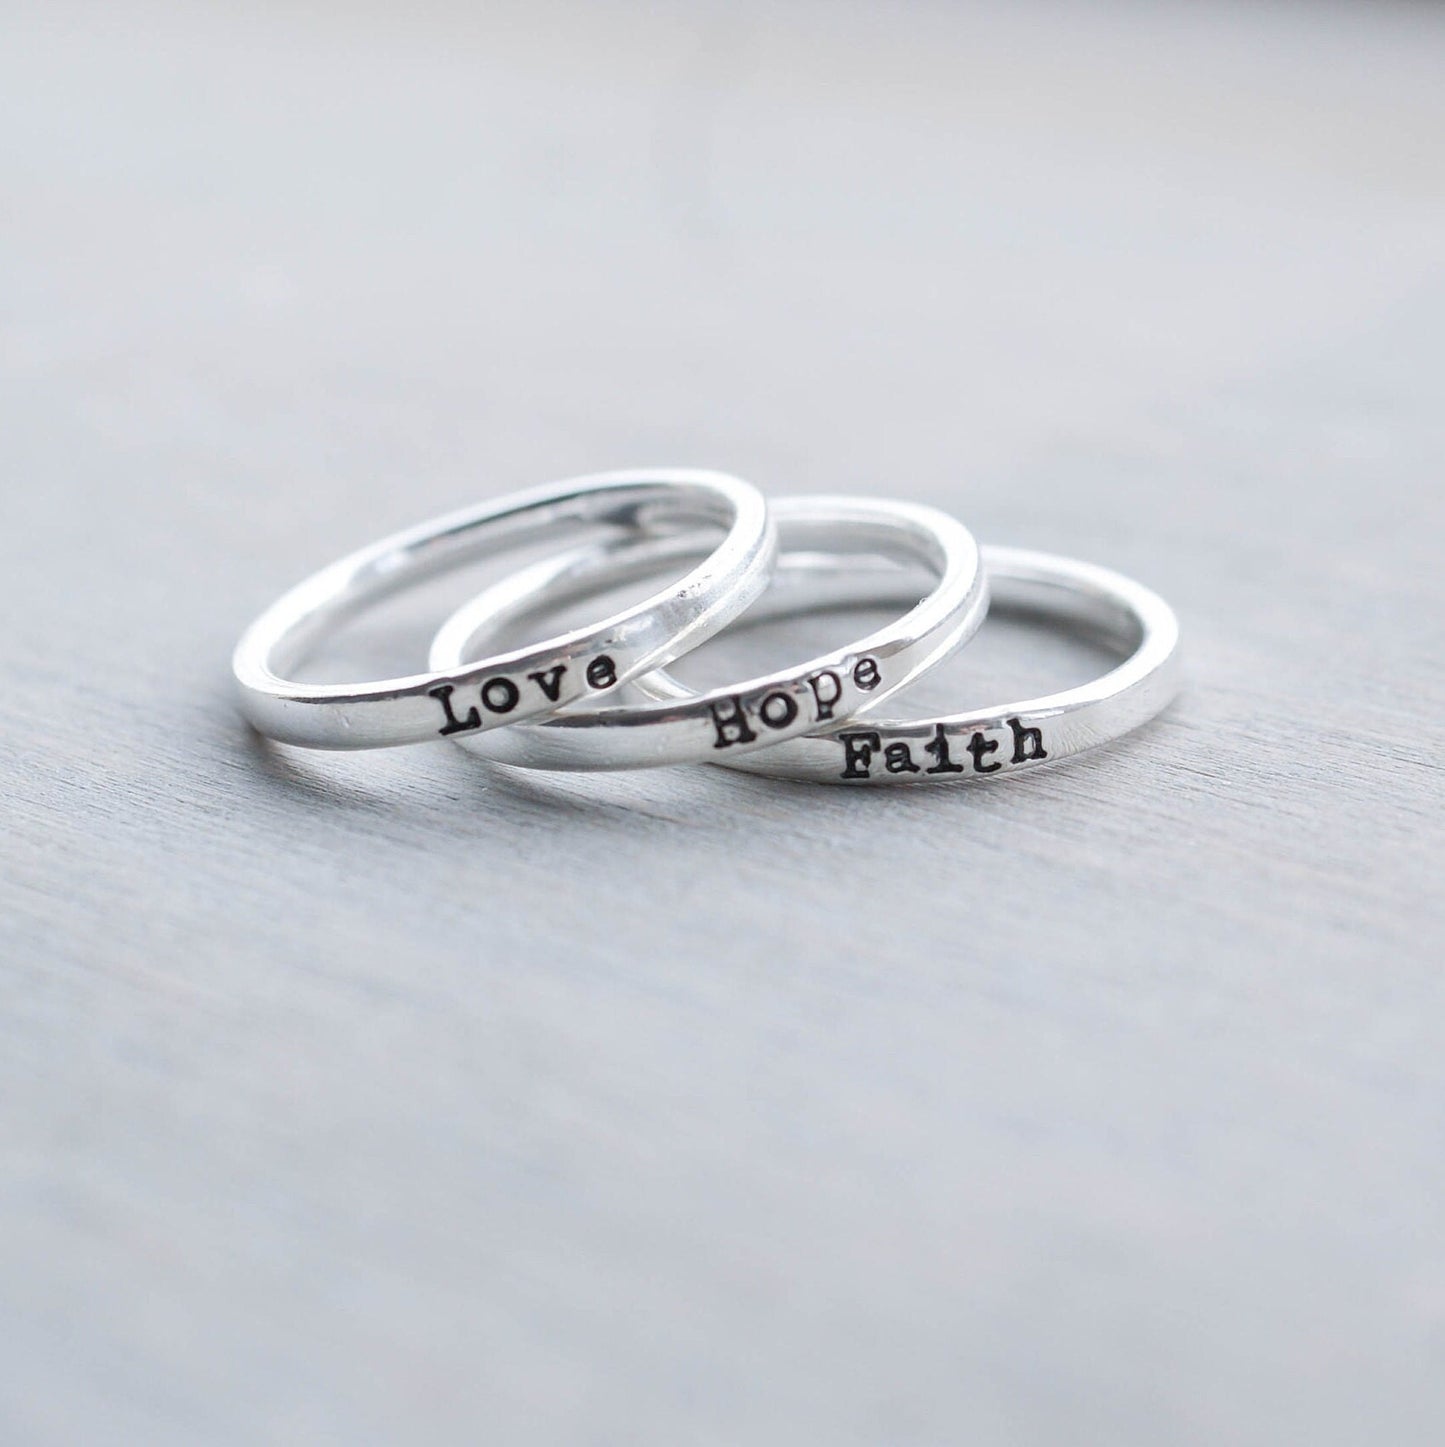 3 Sterling silver rings stamped with Faith, hope and love